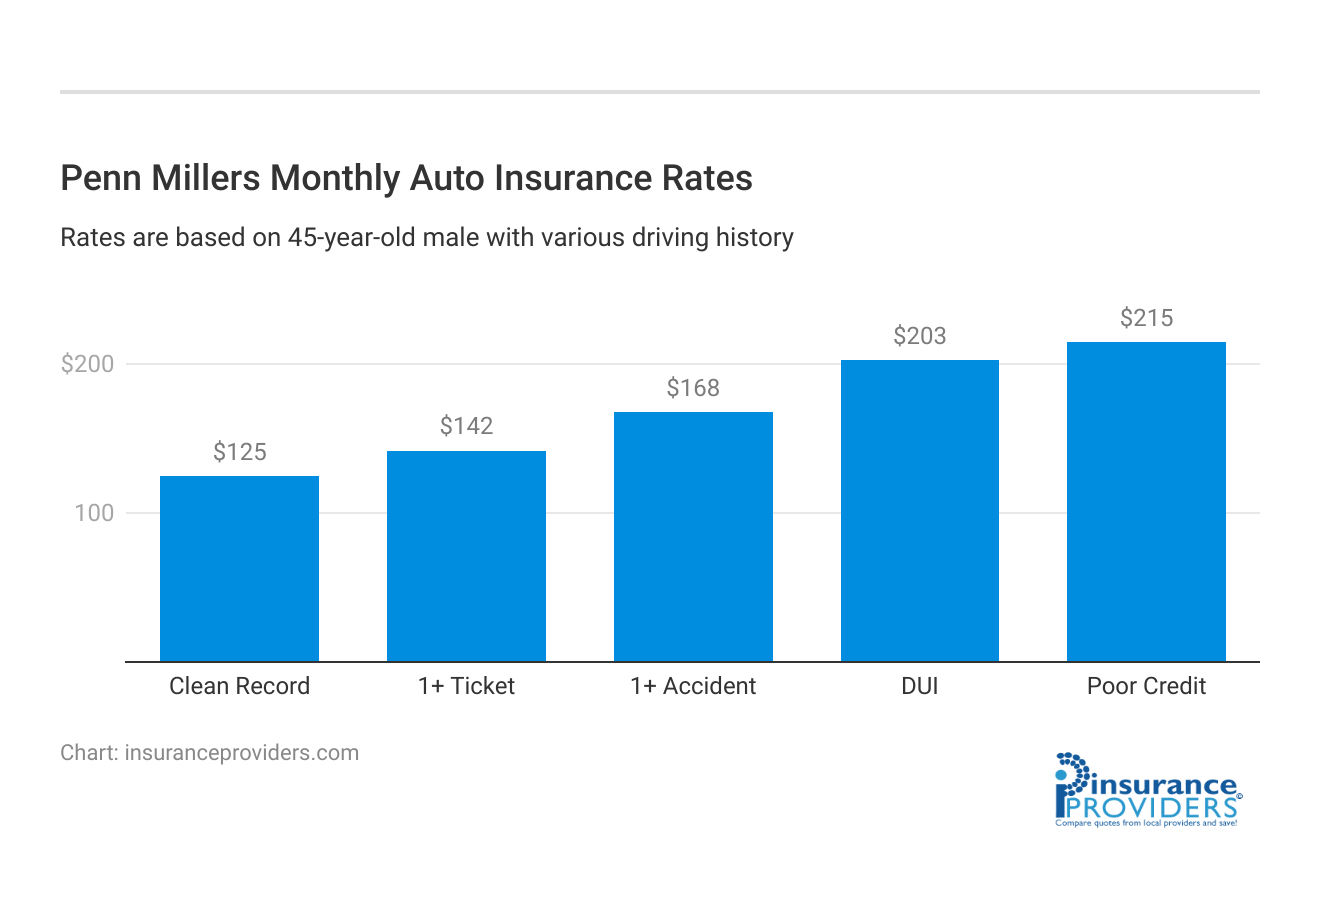 <h3>Penn Millers Monthly Auto Insurance Rates</h3>